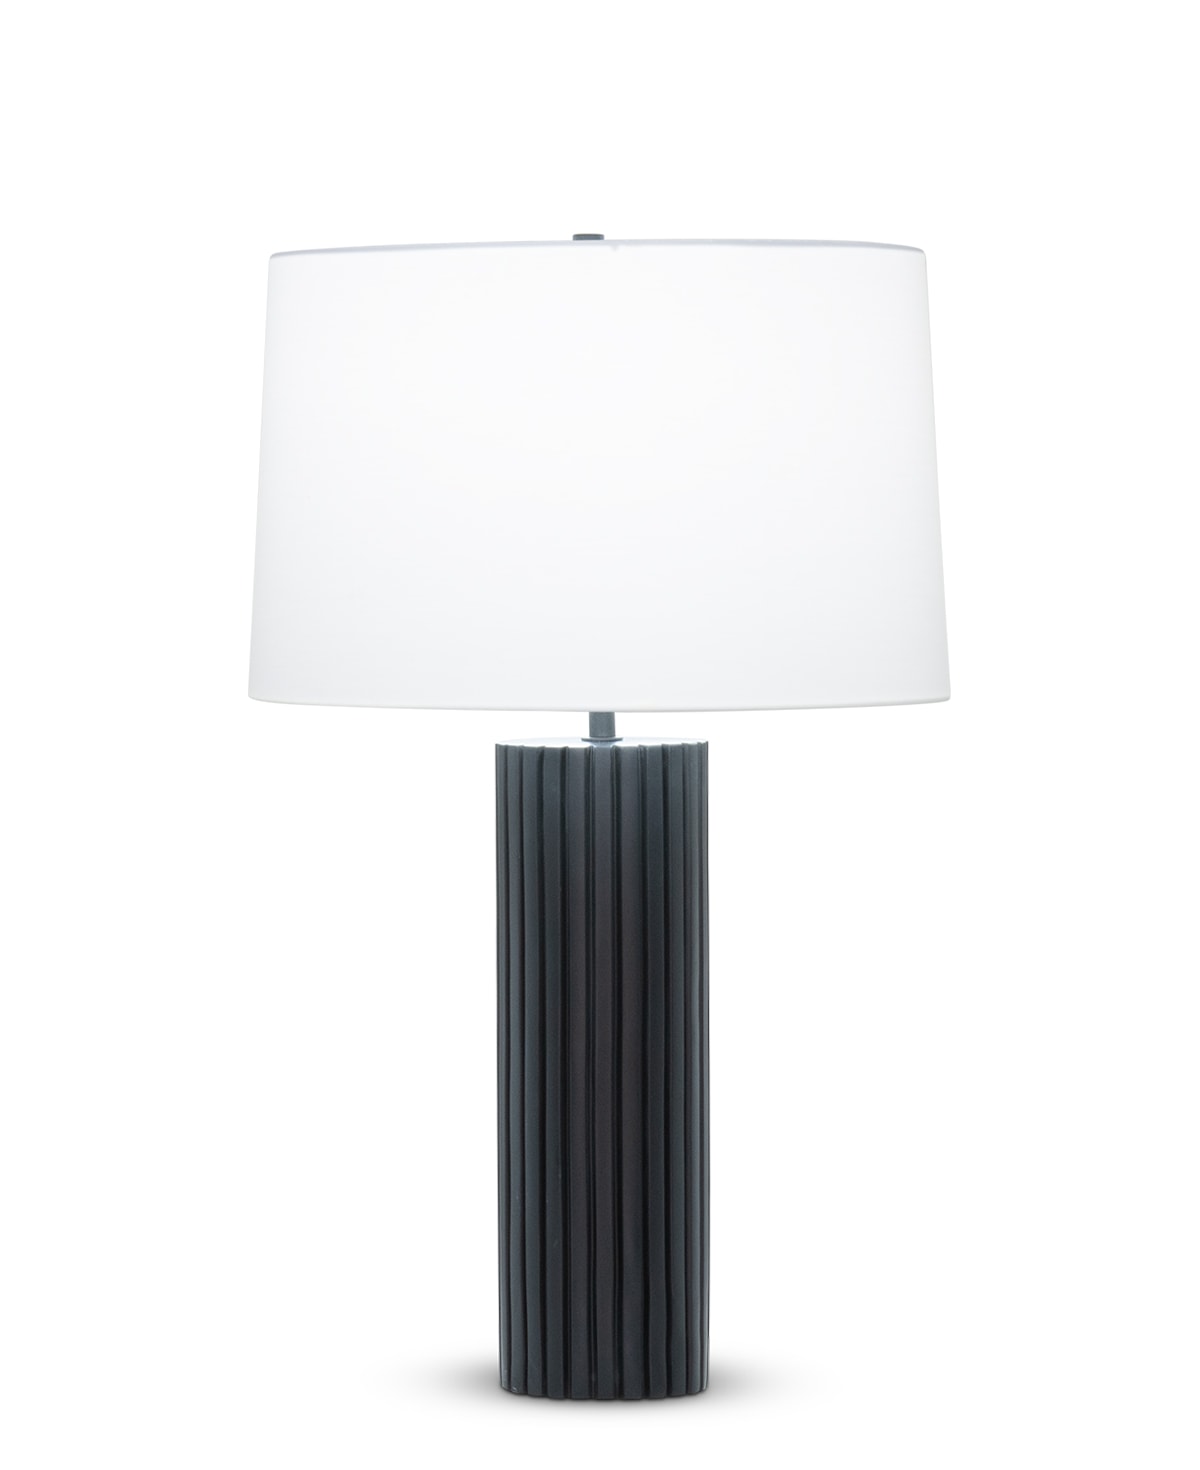 FlowDecor Bluth Table Lamp in resin with black matte finish and off-white cotton tapered drum shade (# 4518)